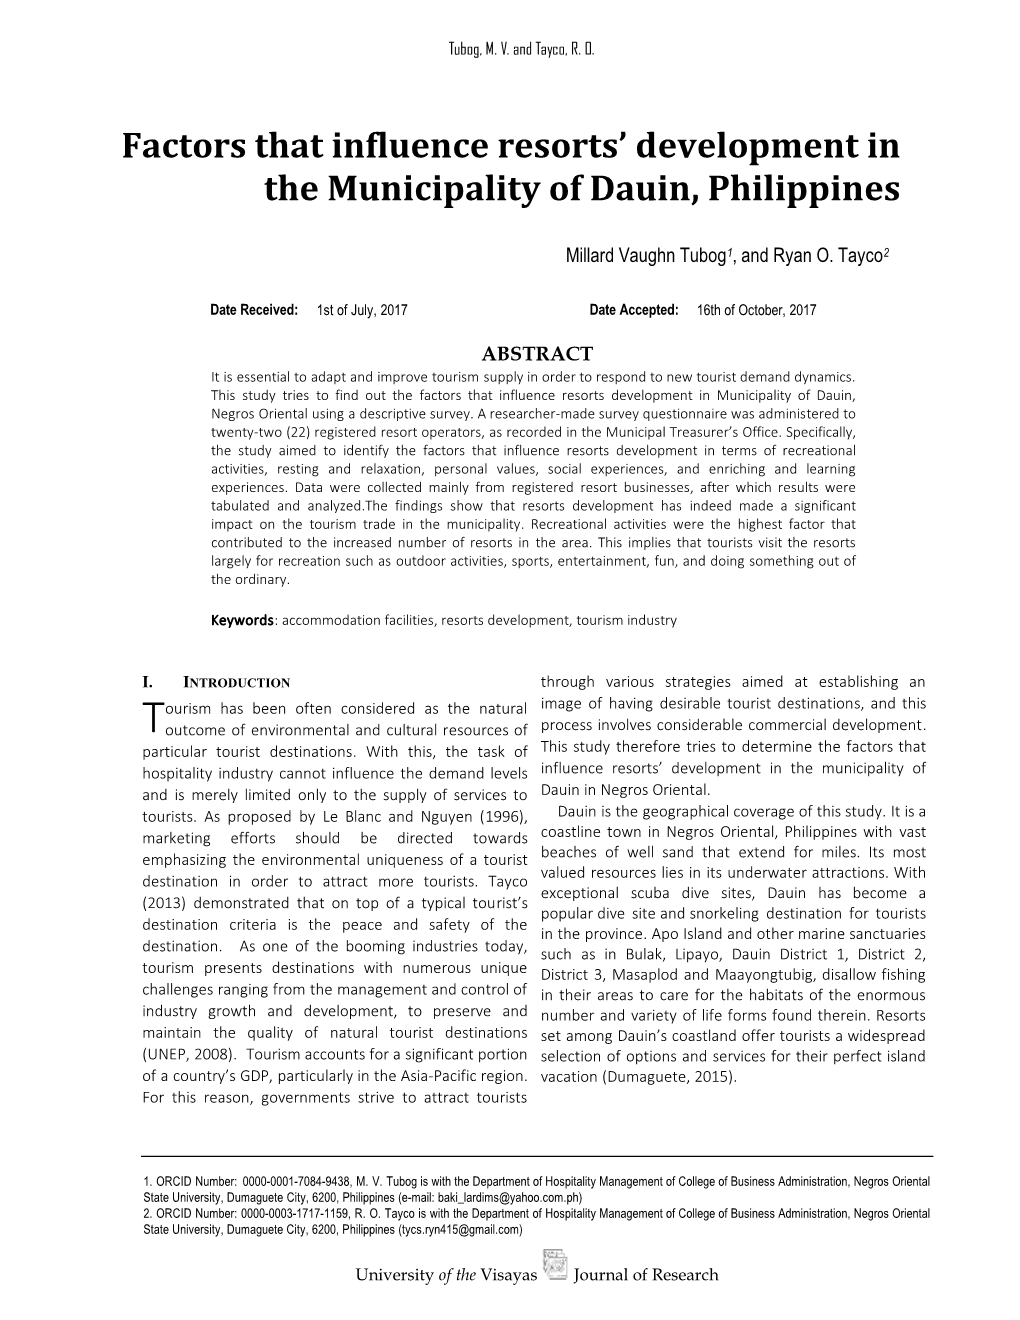 Factors That Influence Resorts' Development in the Municipality of Dauin, Philippines